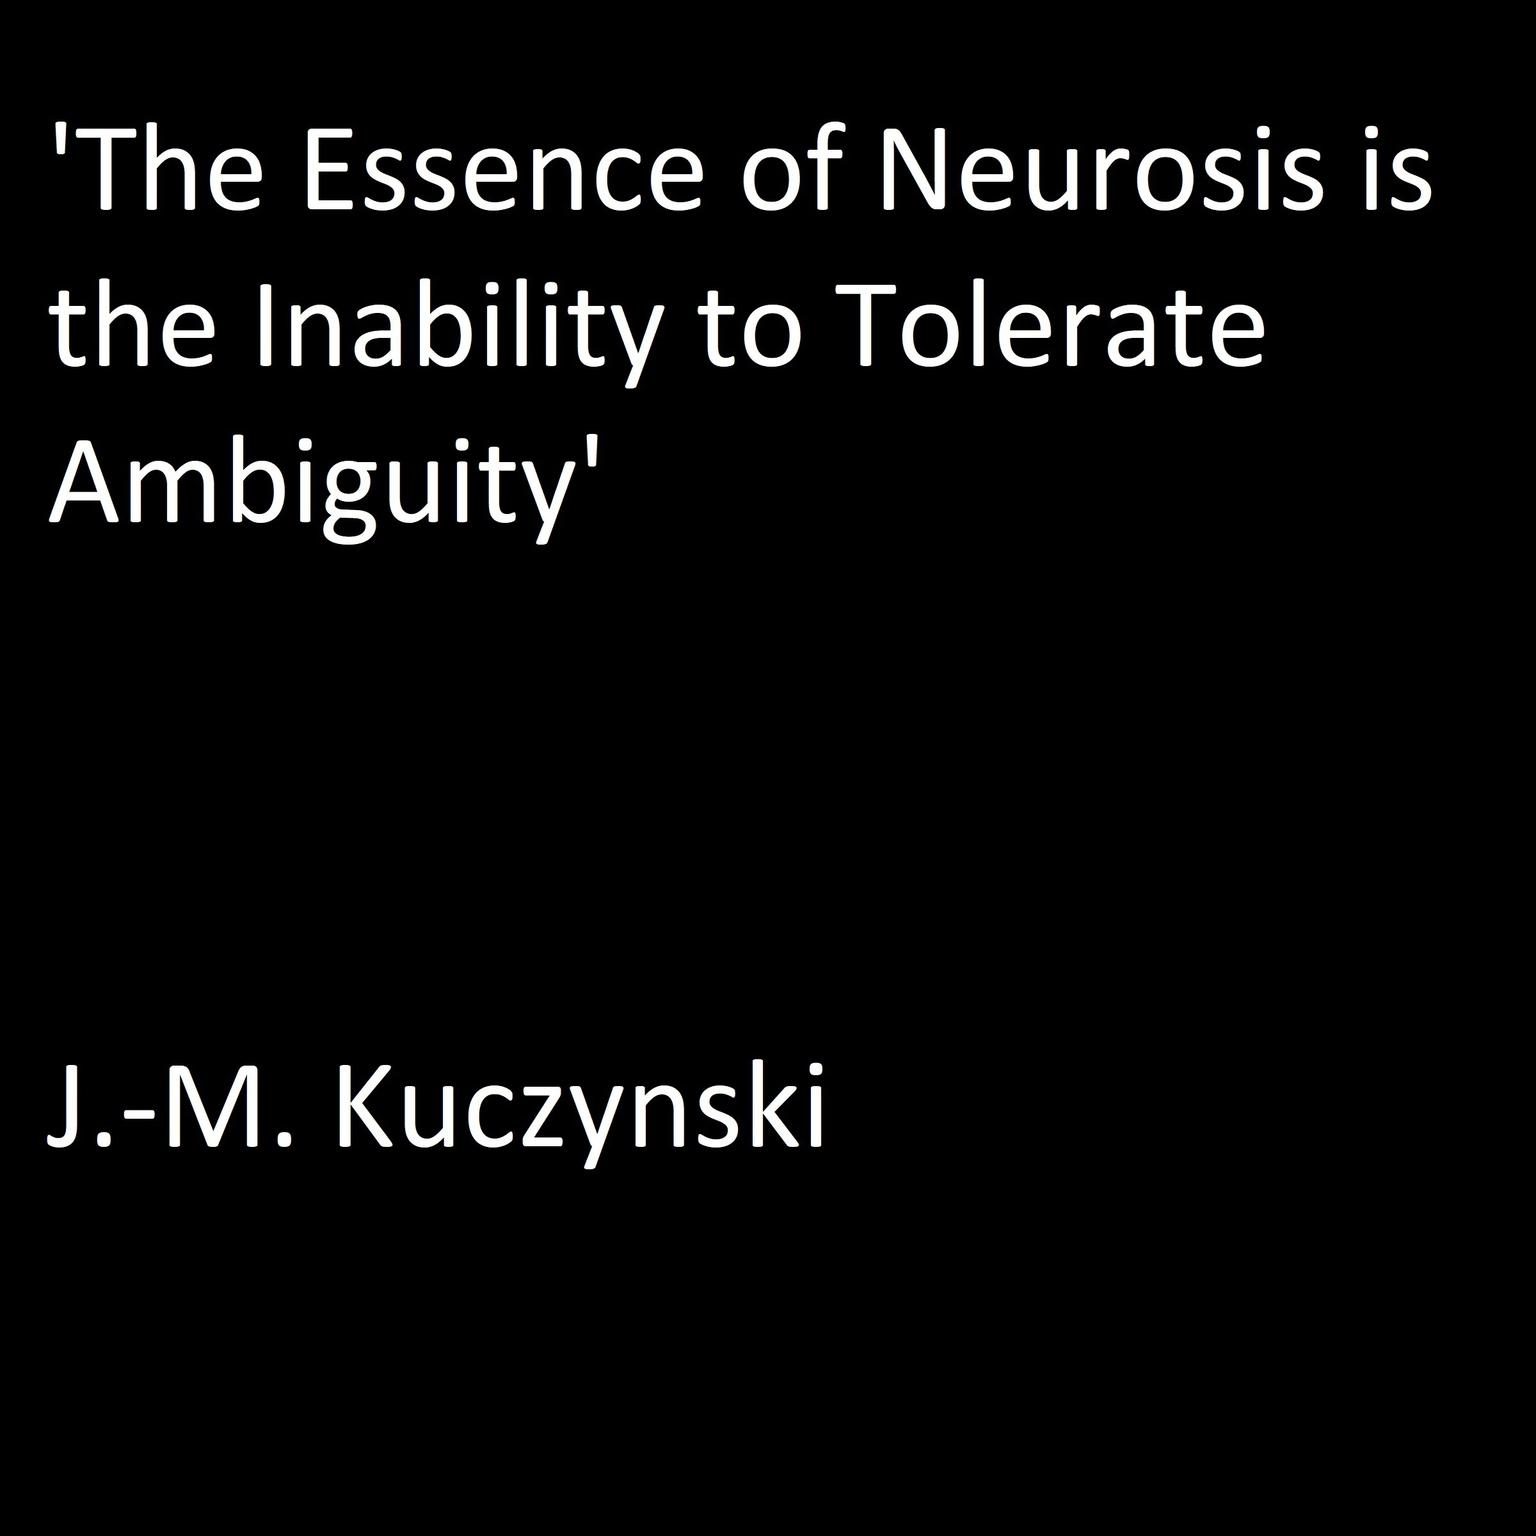 ‘The Essence of Neurosis is the Inability to Tolerate Ambiguity’ Audiobook, by J. M. Kuczynski